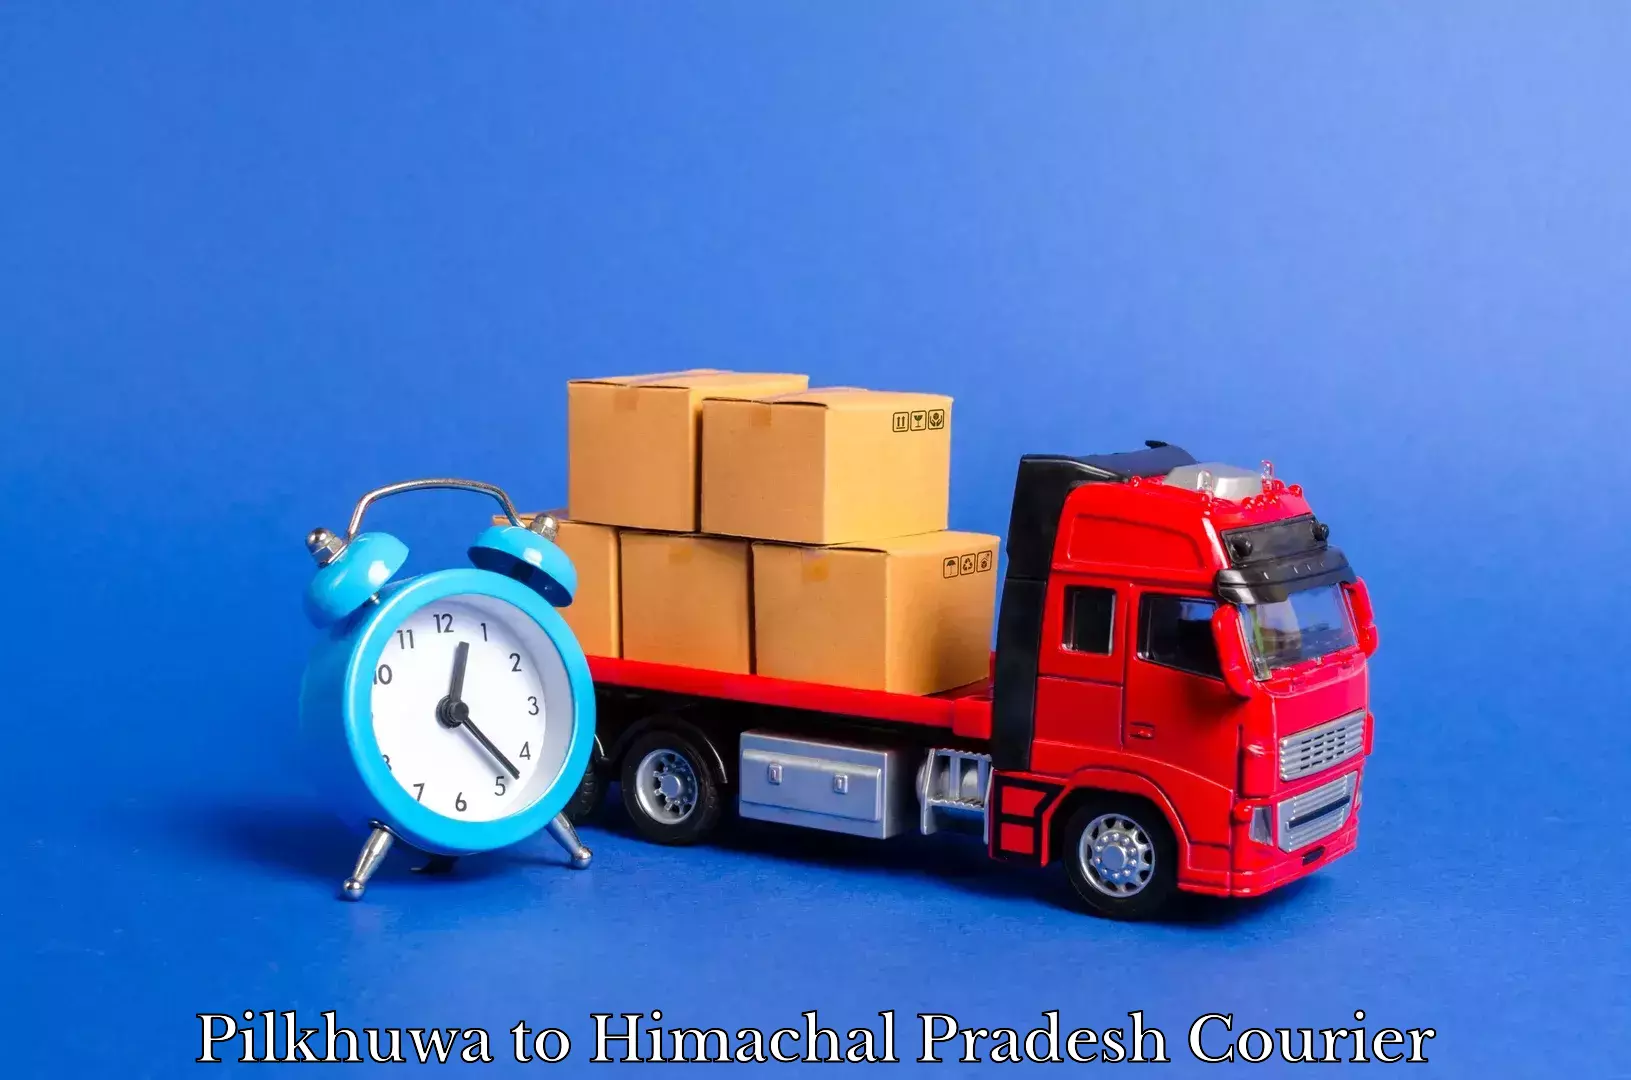 Affordable relocation services in Pilkhuwa to Sundla